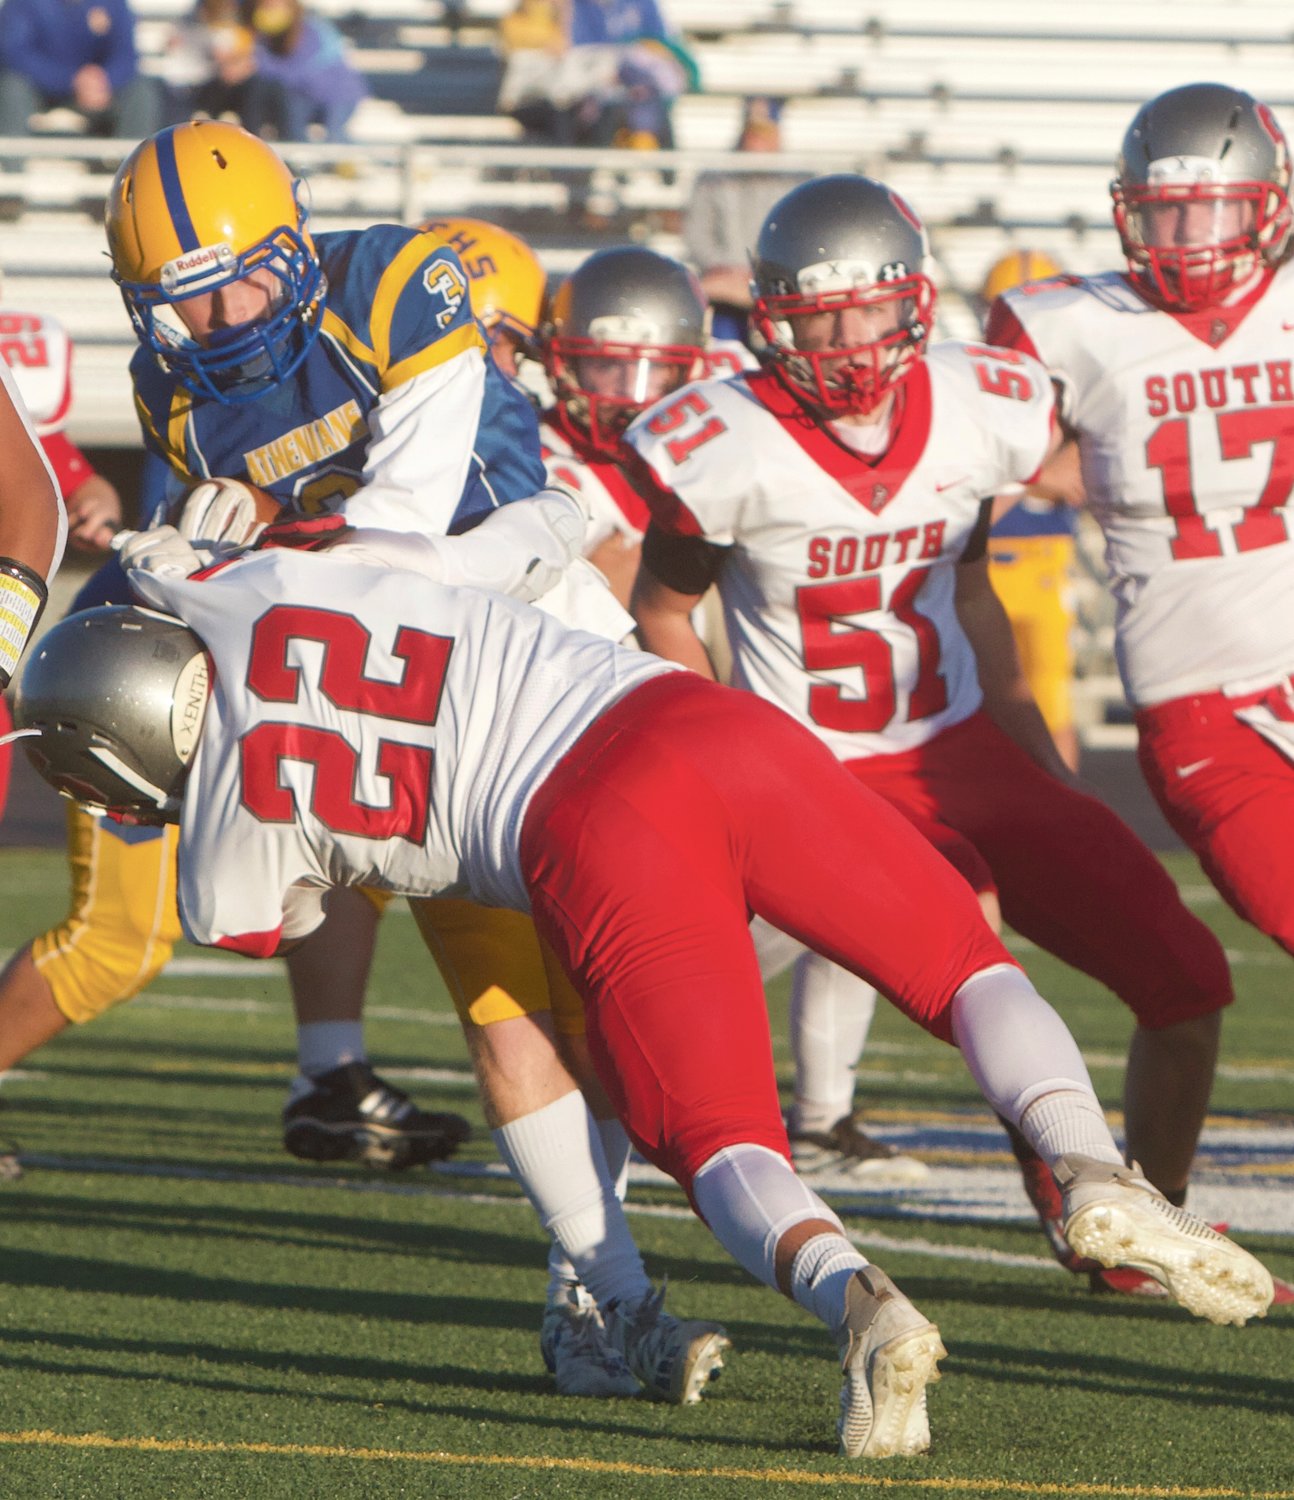 Southmont's Wyatt Woodall makes a diving tackle against Crawfordsville.